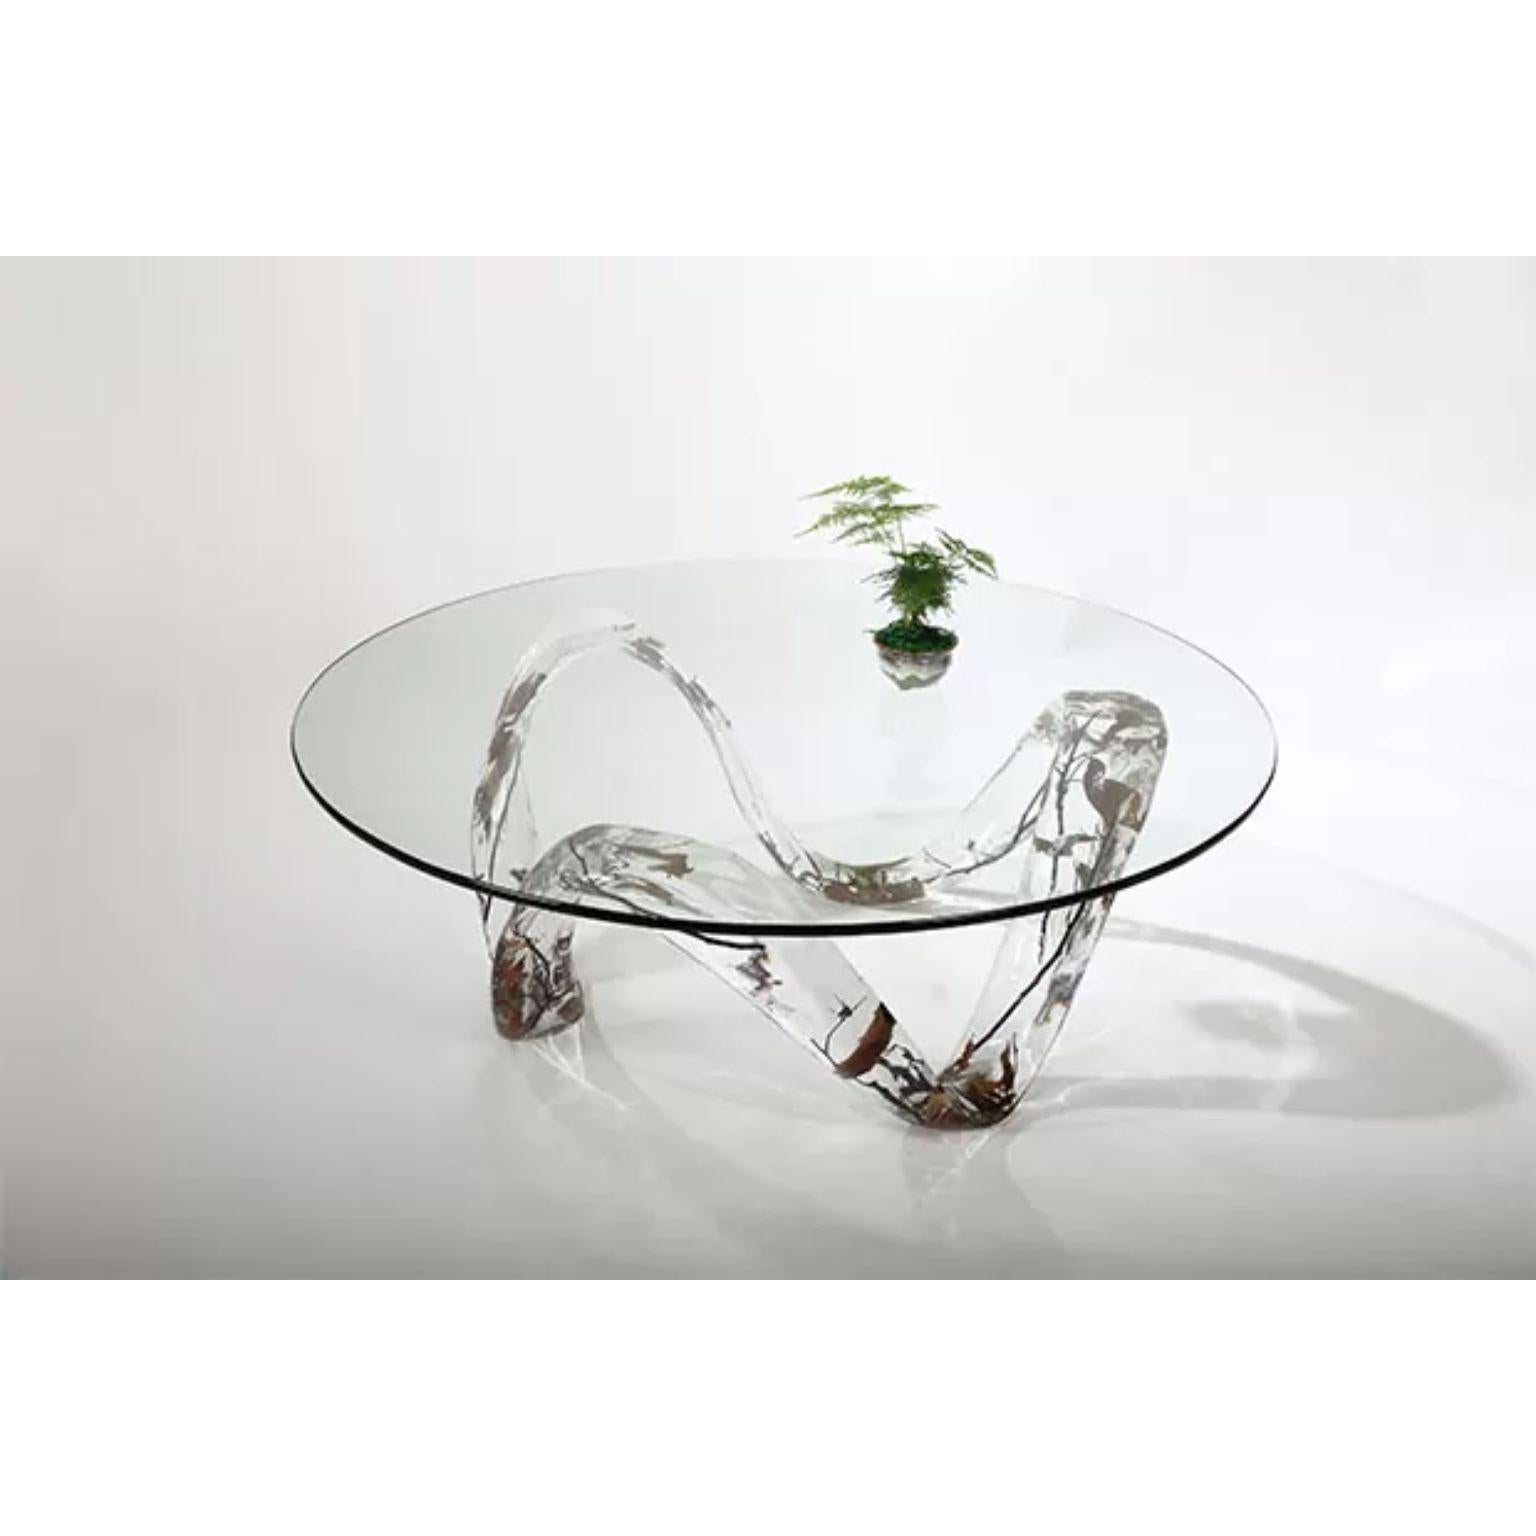 Round Luxury Coffee Table by Dainte
Dimensions: Ø 110 x H 30.5 cm.
Materials: Crystal. 

This magnificent round coffee table is both functional and elegantly designed. It is a wonder of craftsmanship and will add a sense of sophistication and flair